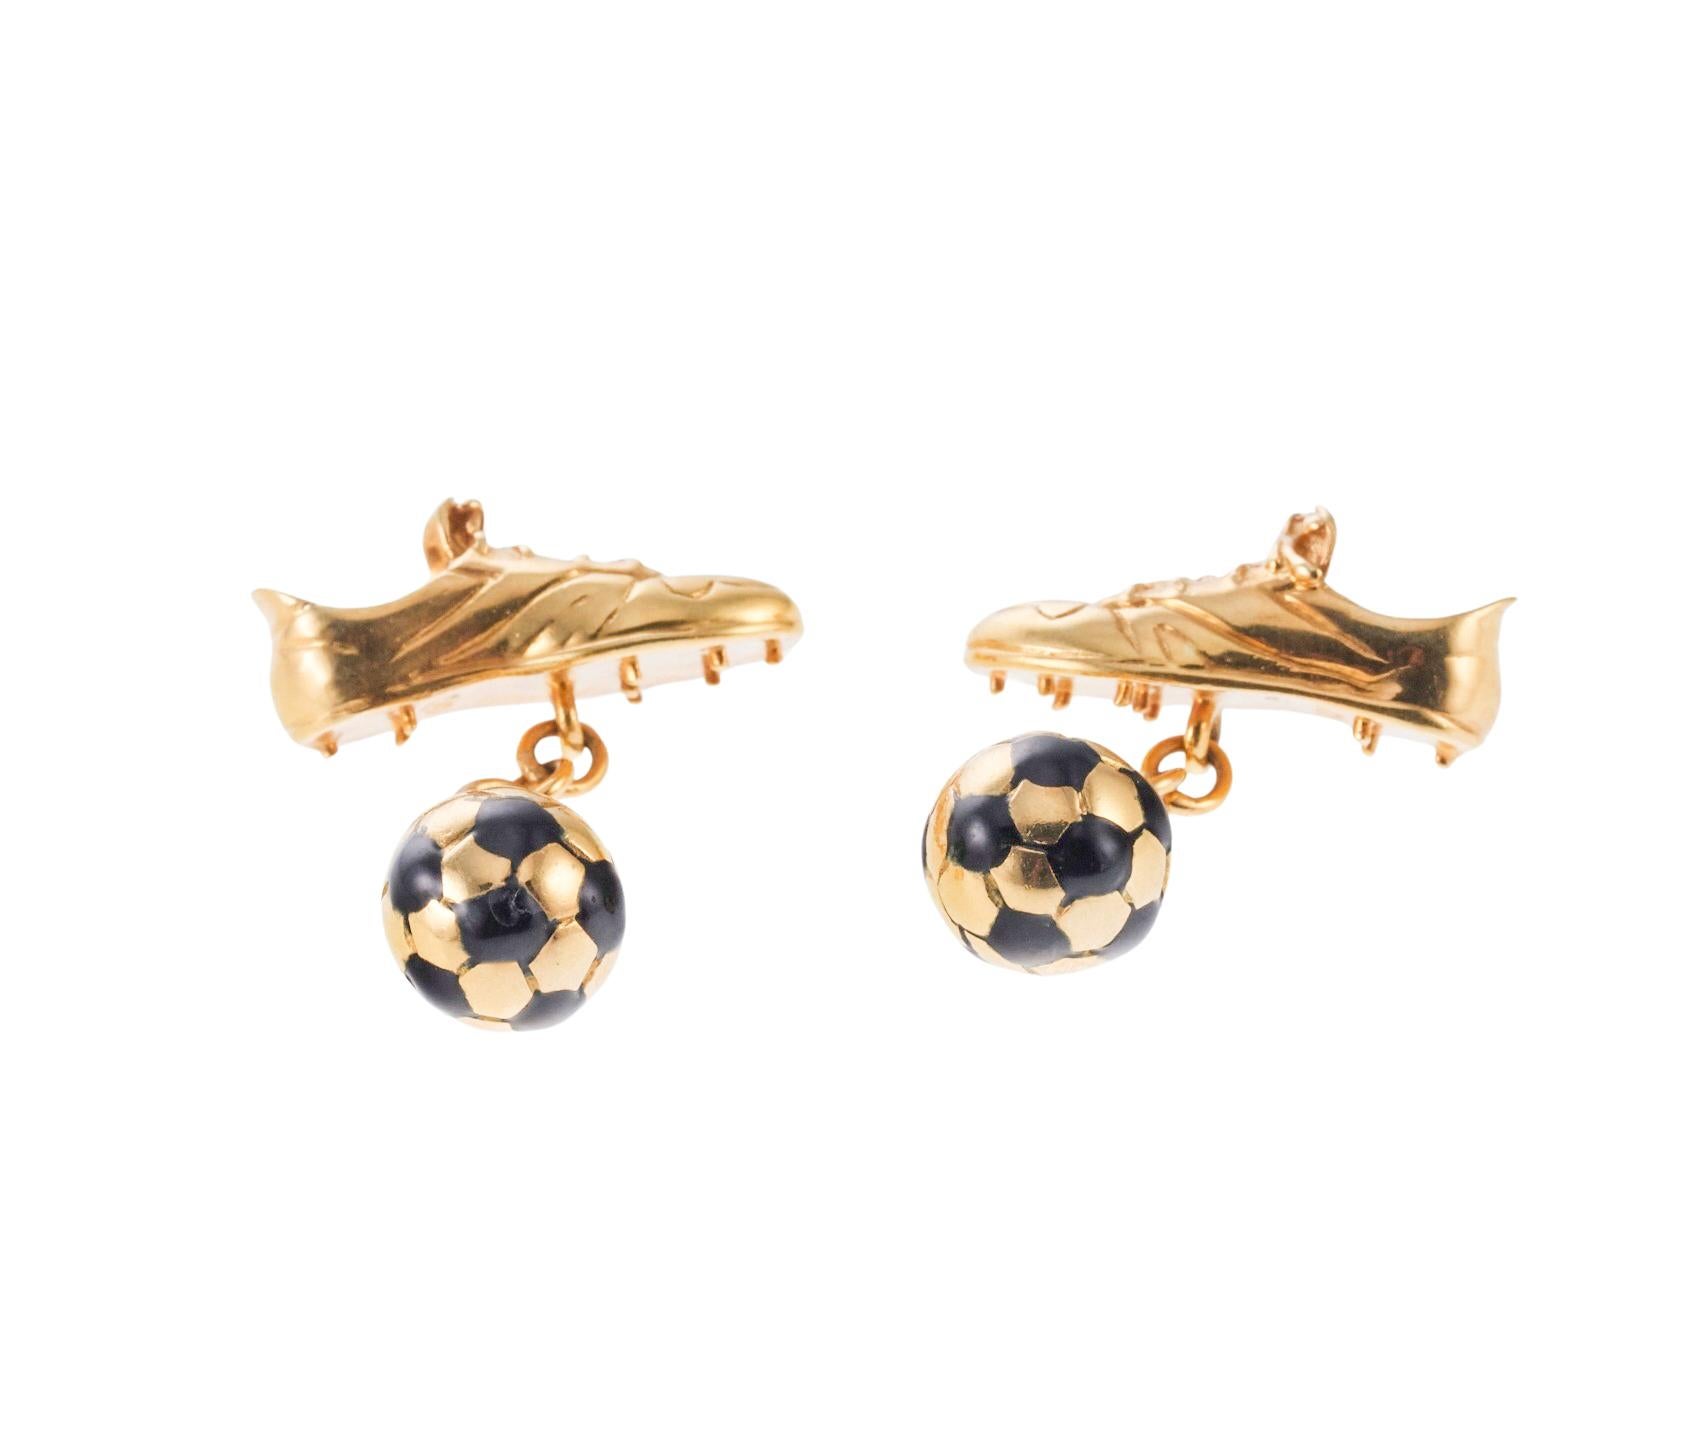 Men's Links of London Enamel Gold Soccer Sneakers and Ball Cufflinks For Sale